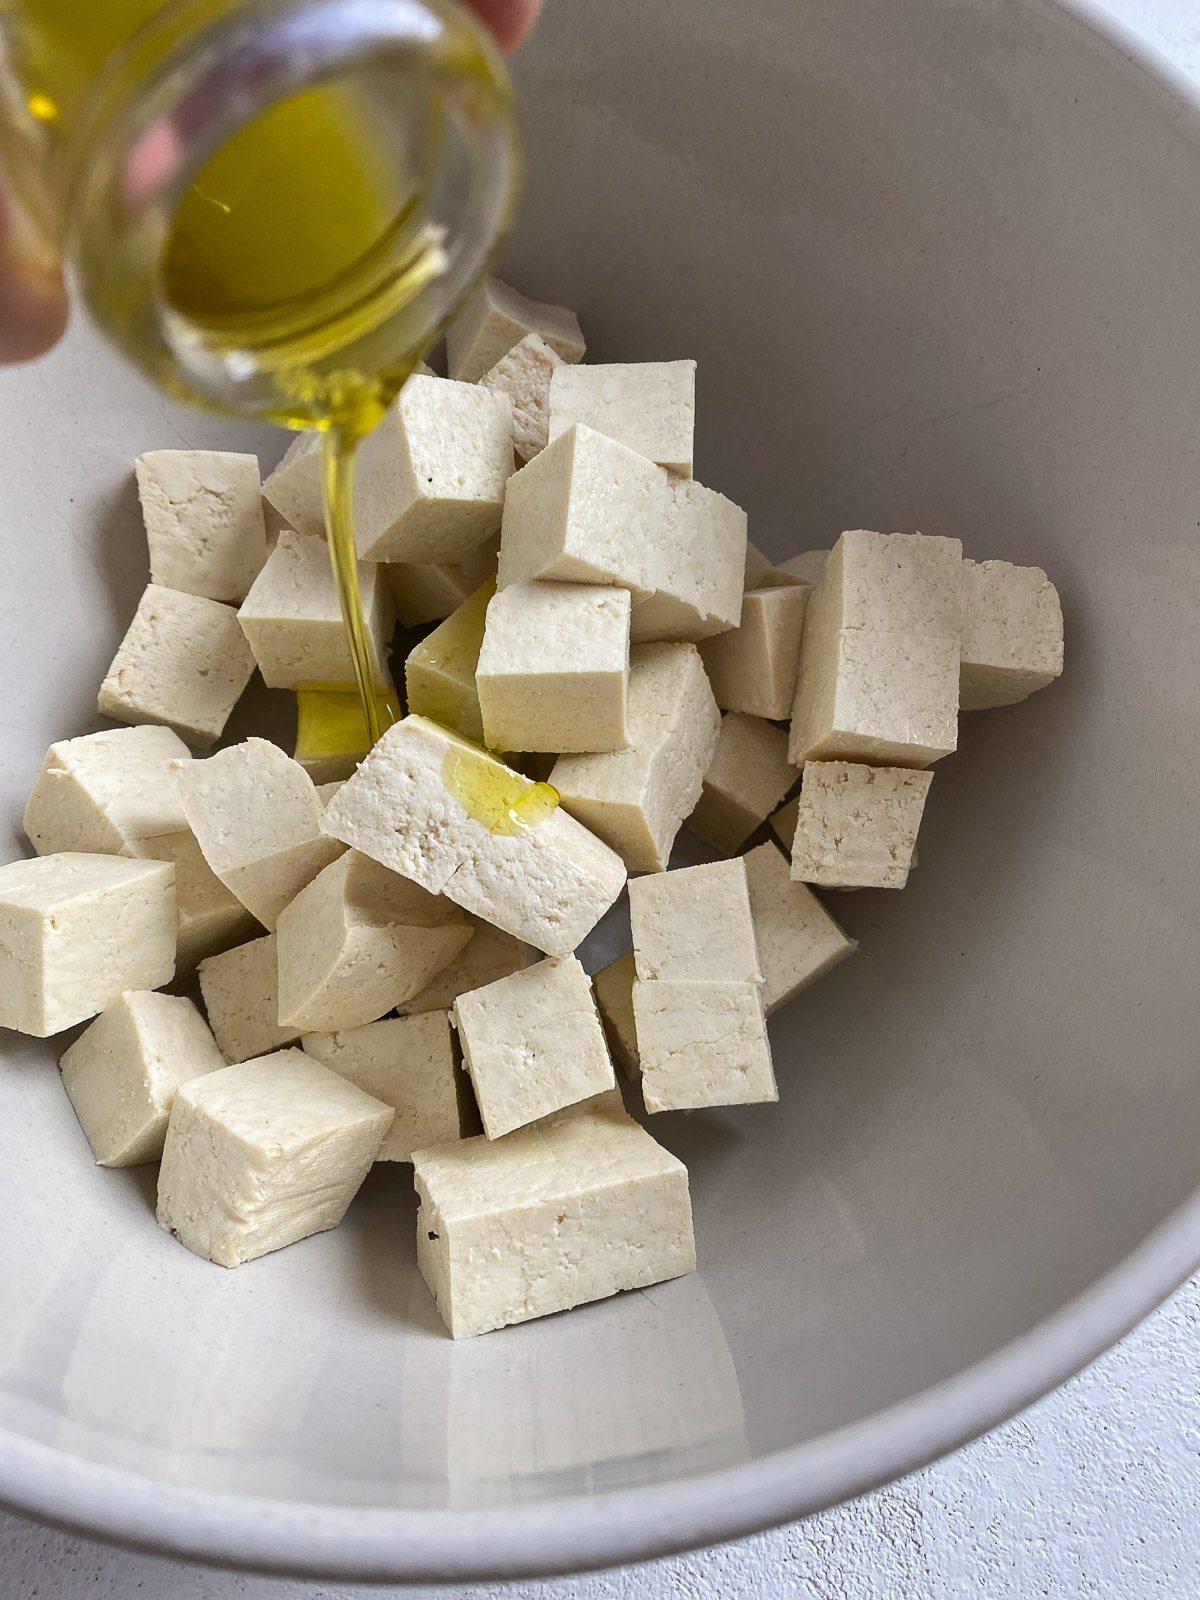 process shot of adding oil to cubed tofu in a white bowl